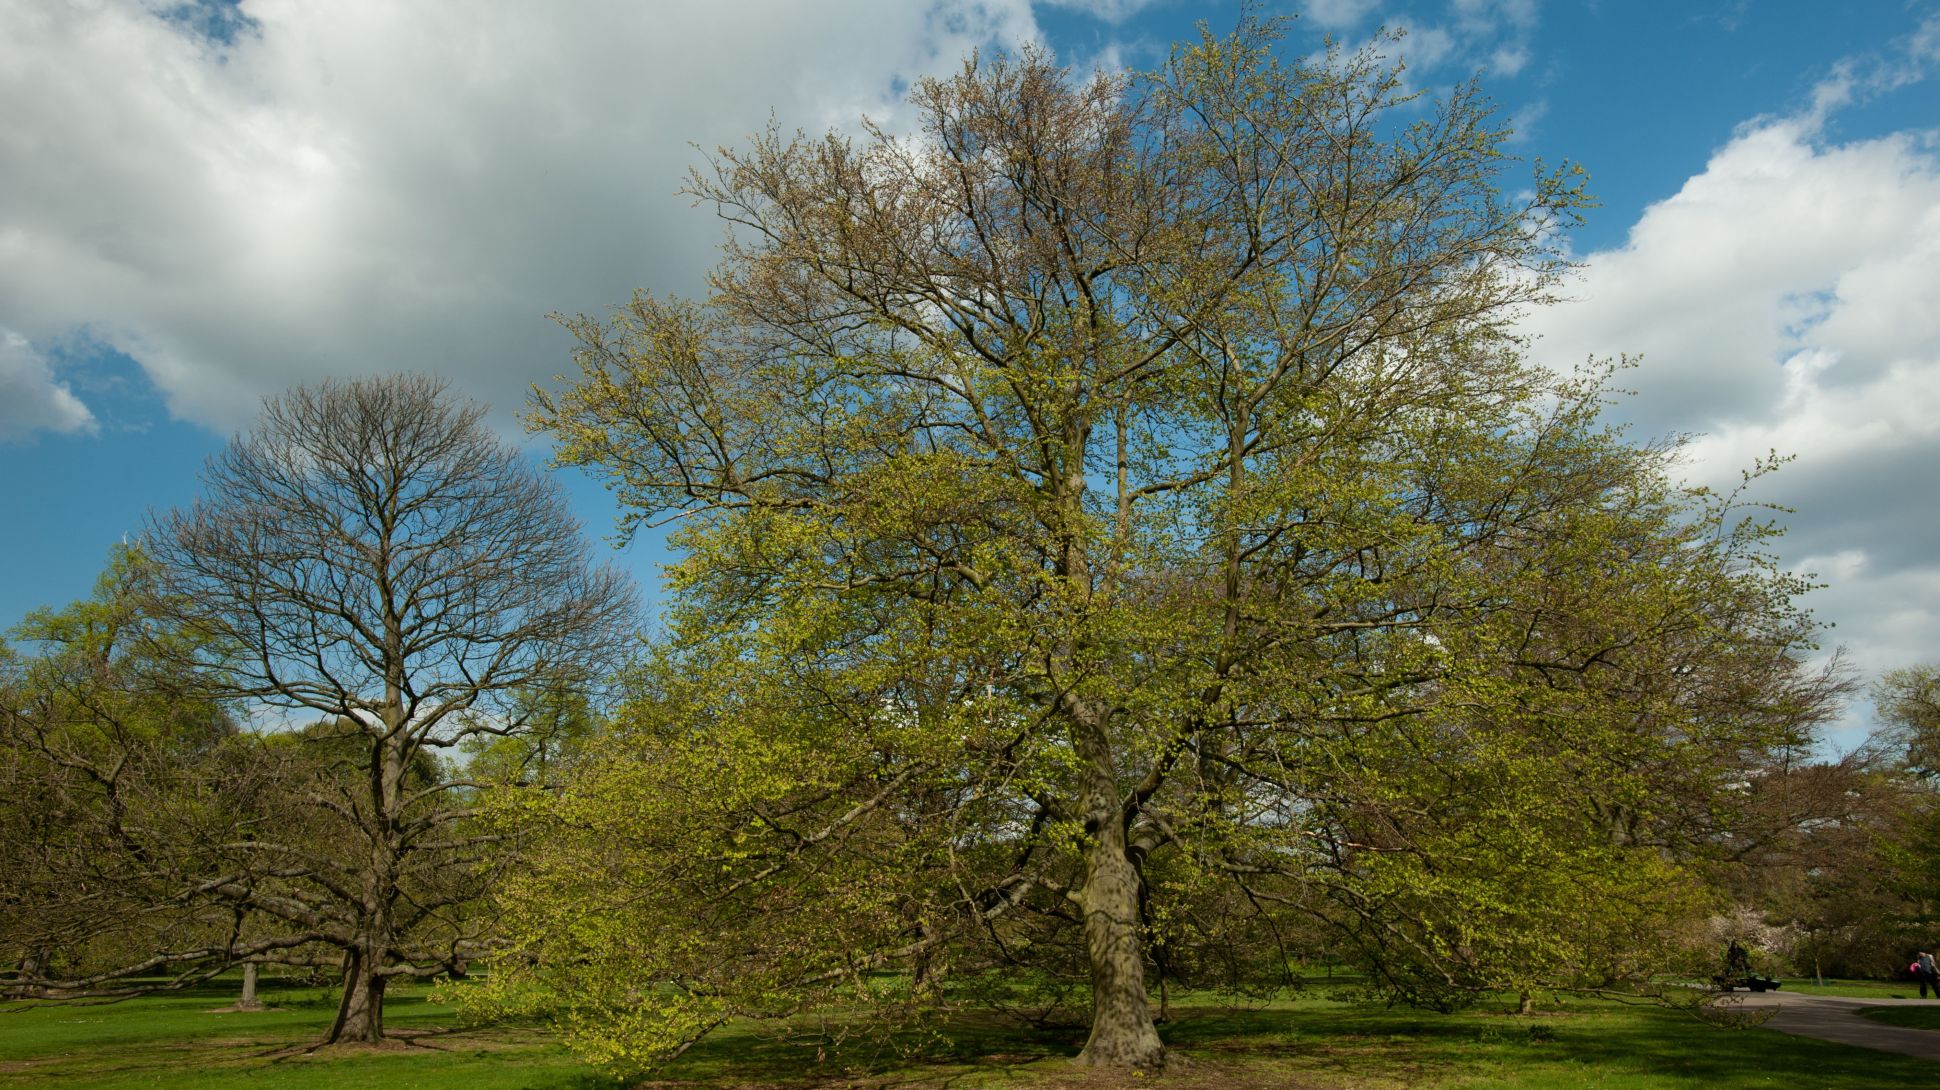 A large leafy beech tree standing in a garden